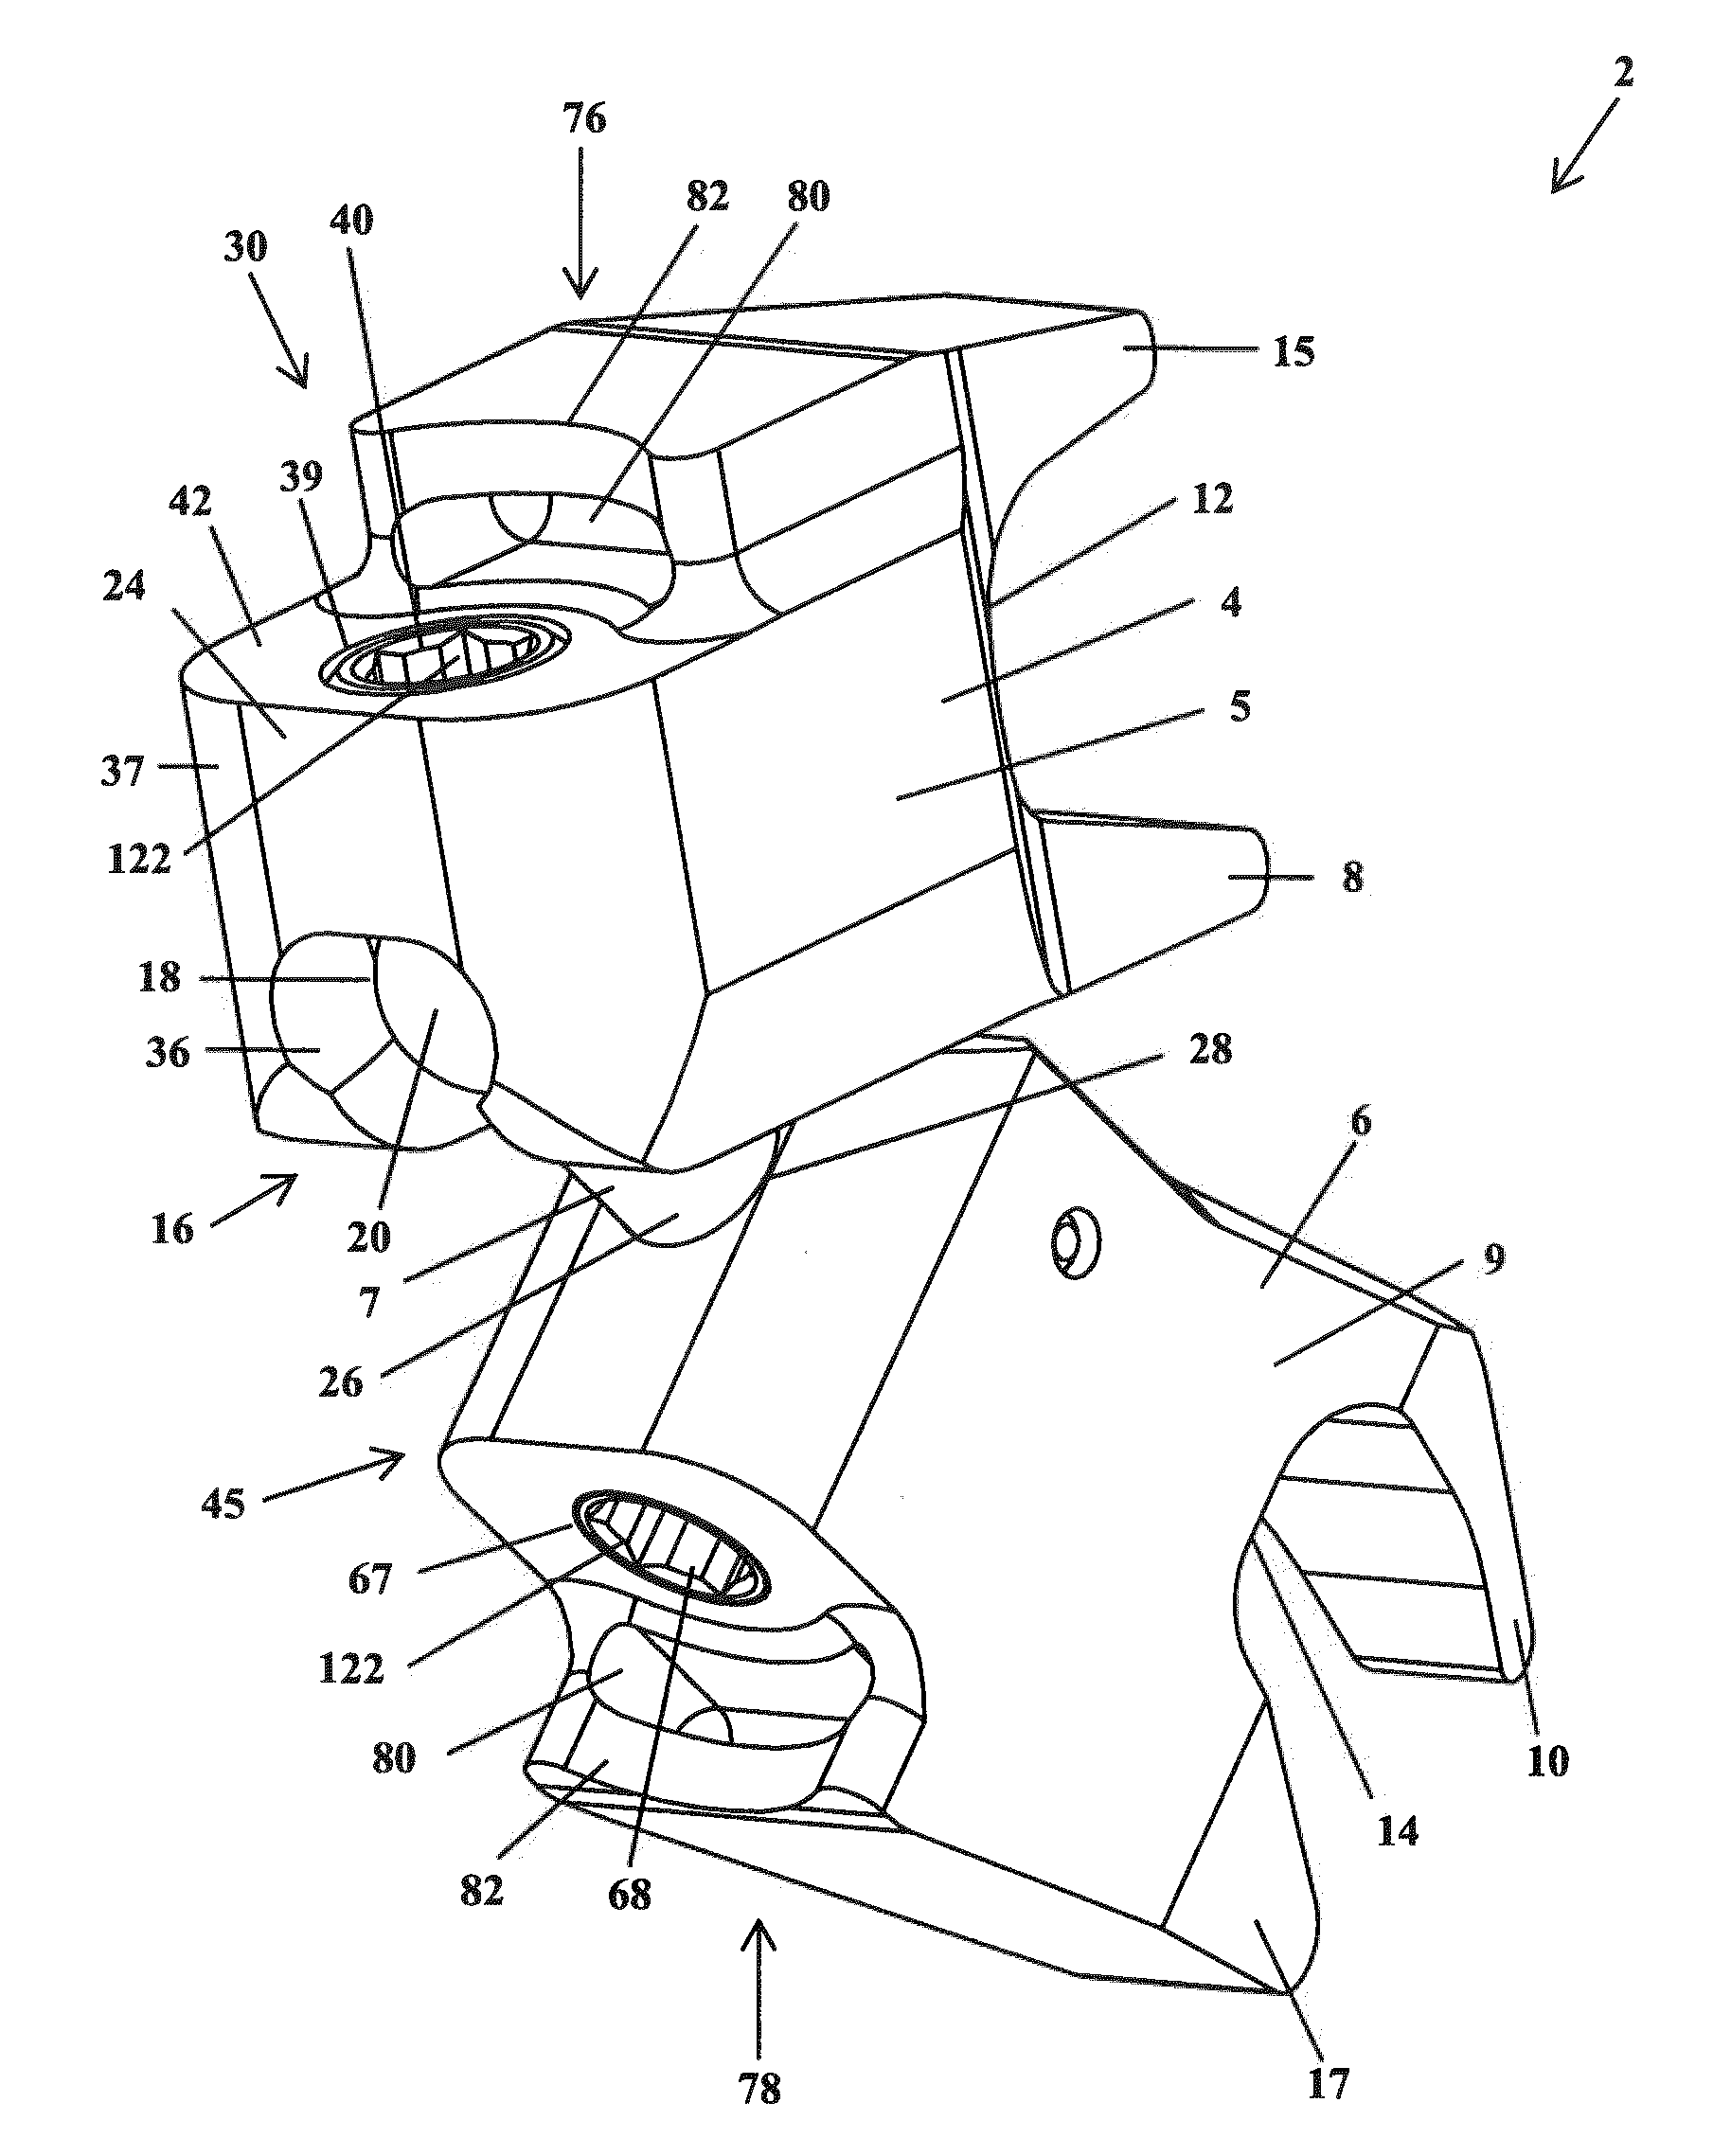 Intervertebral Implant Devices And Methods For Insertion Thereof